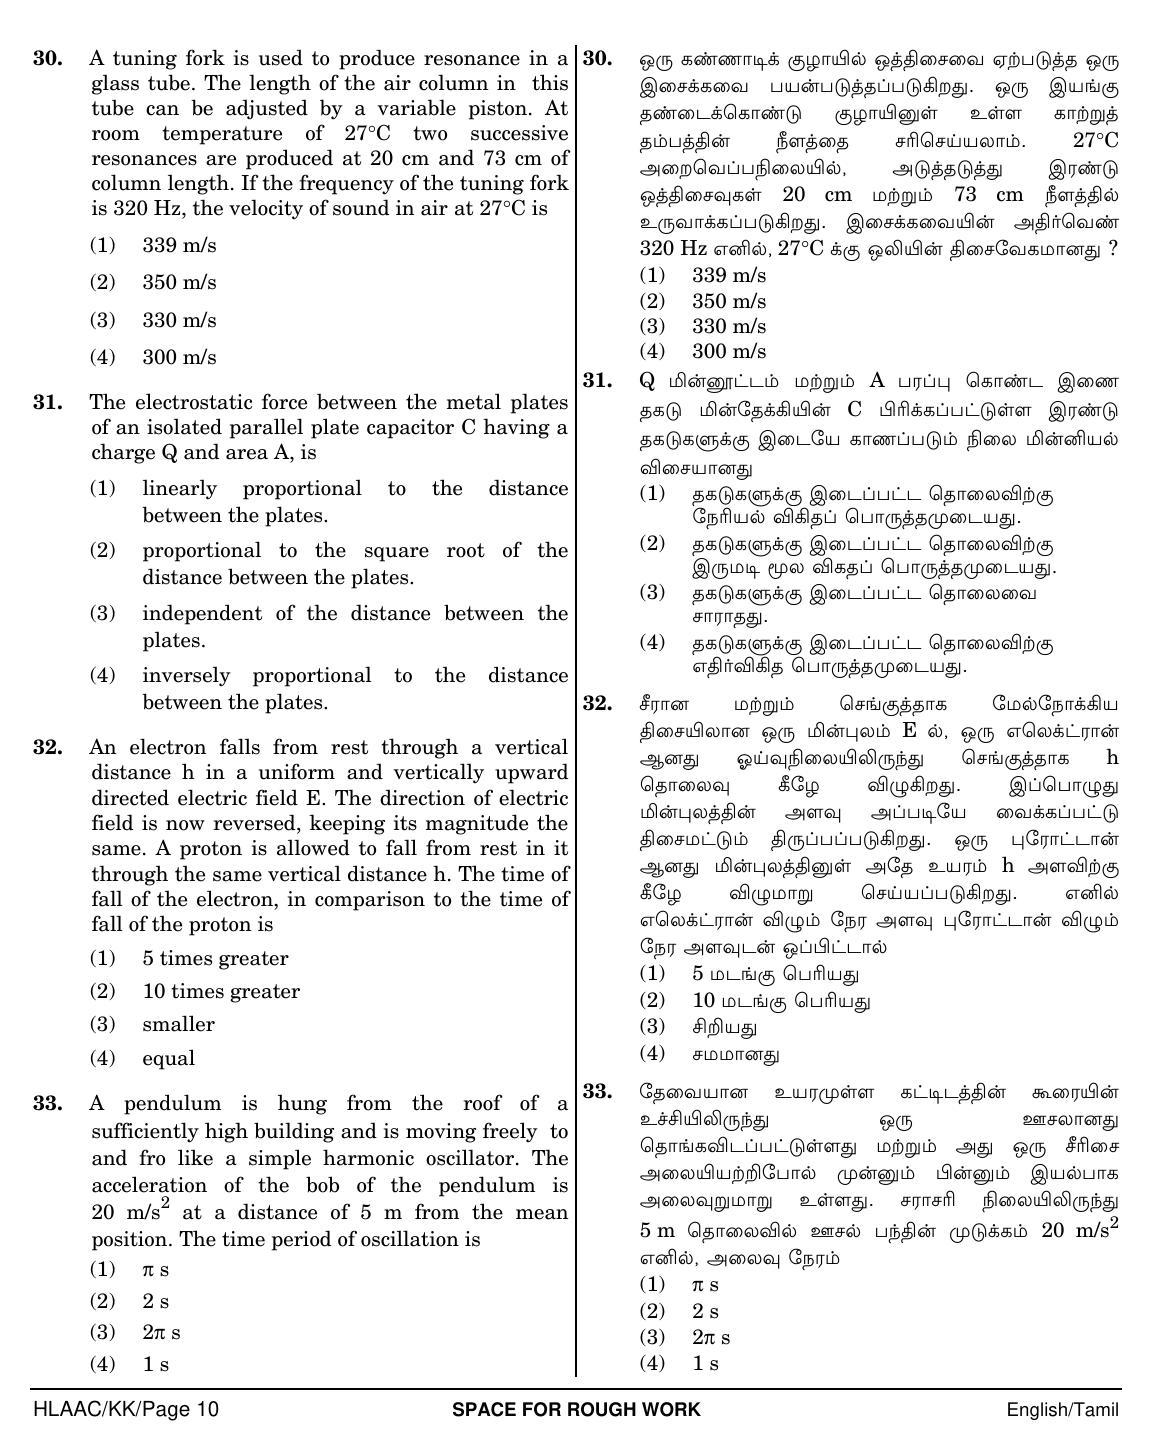 NEET Tamil KK 2018 Question Paper - Page 10